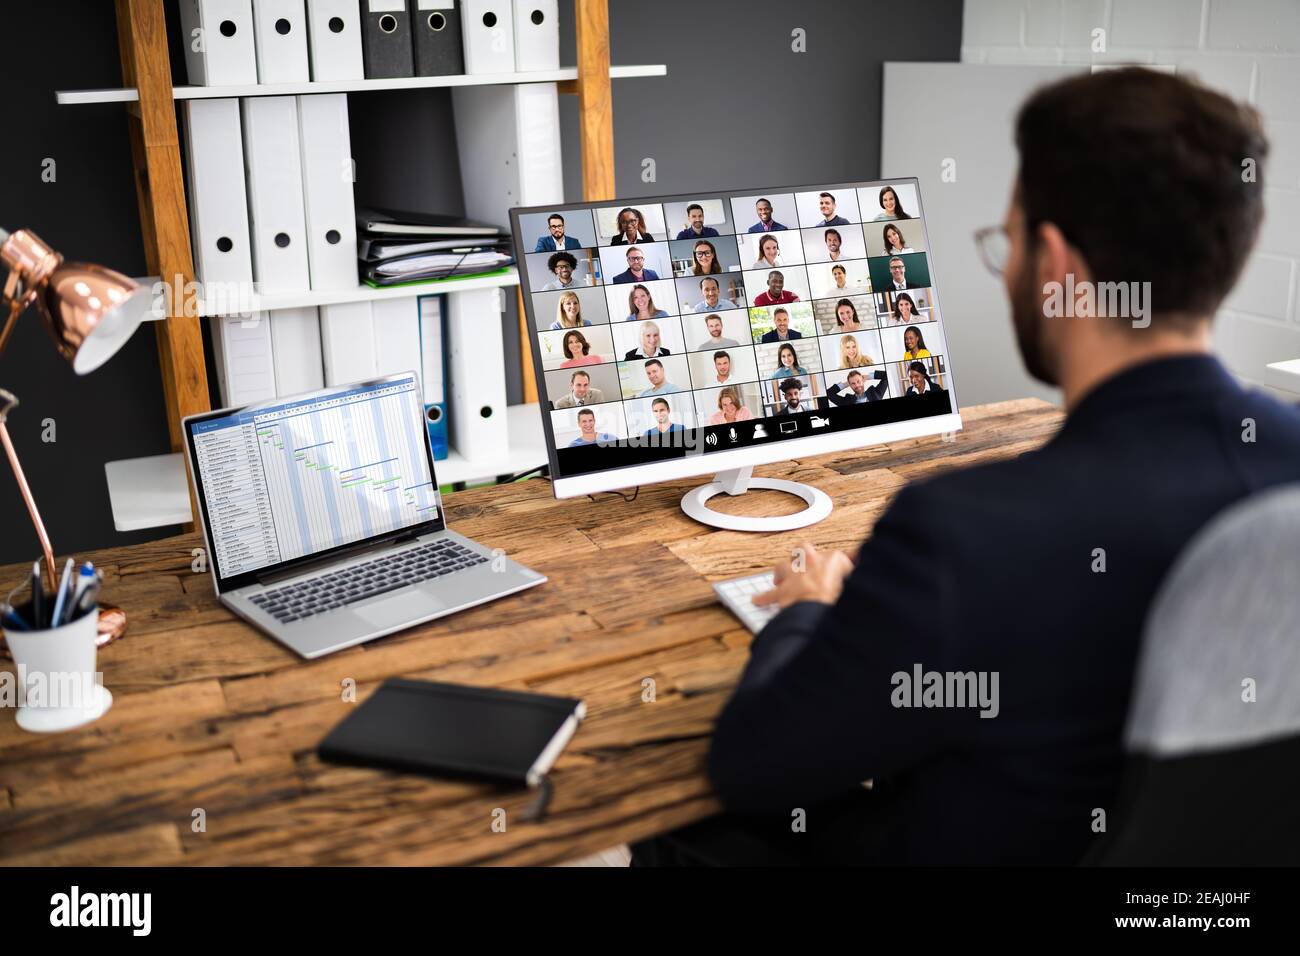 Online Video Conference Interview Meeting Stock Photo